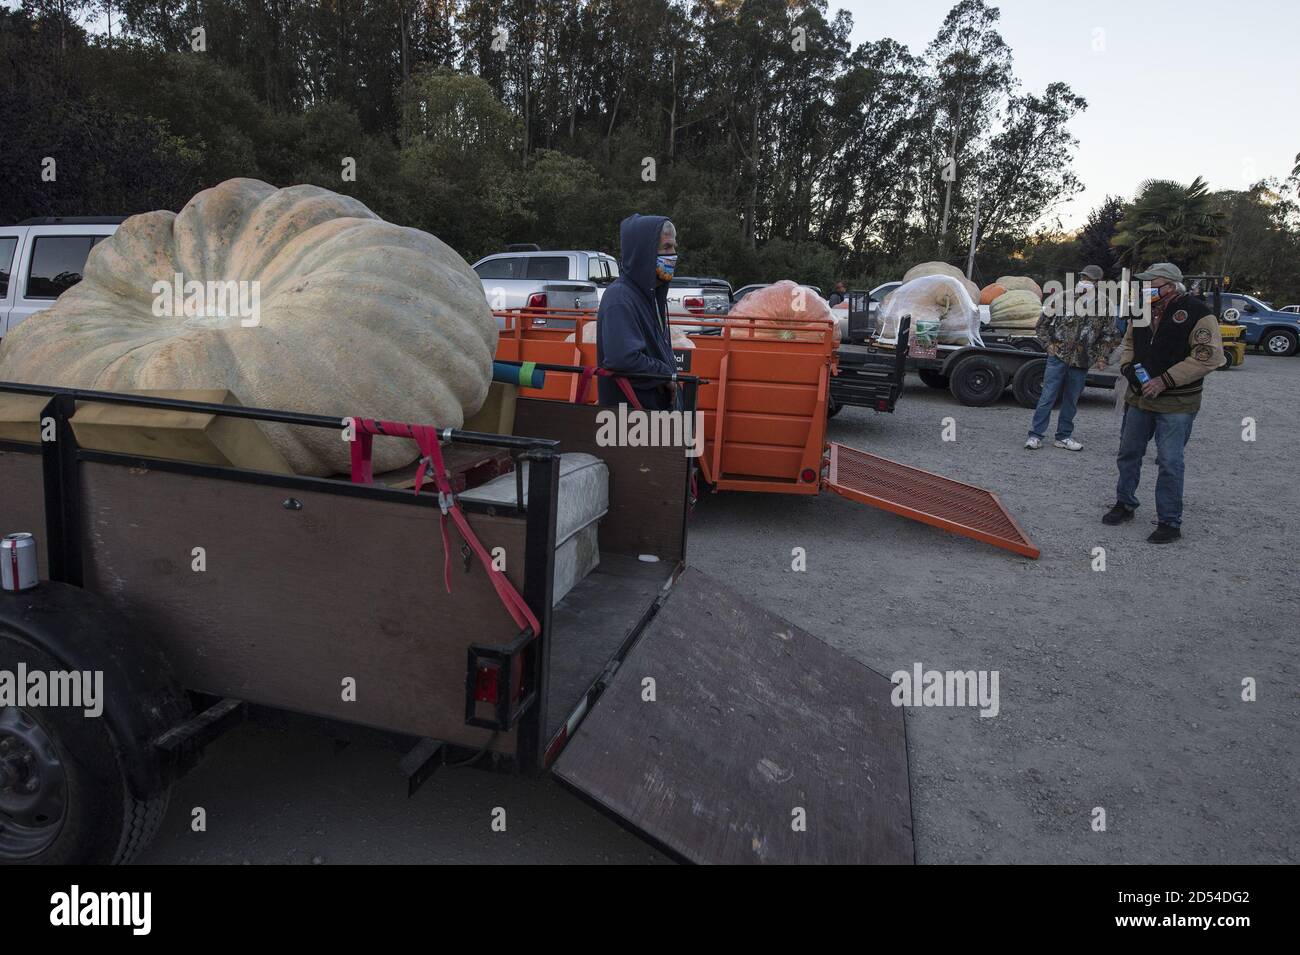 Half Moon Bay, United States. 12th Oct, 2020. Growers wait to have their pumpkins weighed at the 47th annual Championship Pumpkin Weigh-off in Half Moon Bay, California on Monday, October 12, 2020. Travis Gienger of Anoka, Minnesota won this year's competition with his 2350 pound entry. Photo by Terry Schmitt/UPI Credit: UPI/Alamy Live News Stock Photo